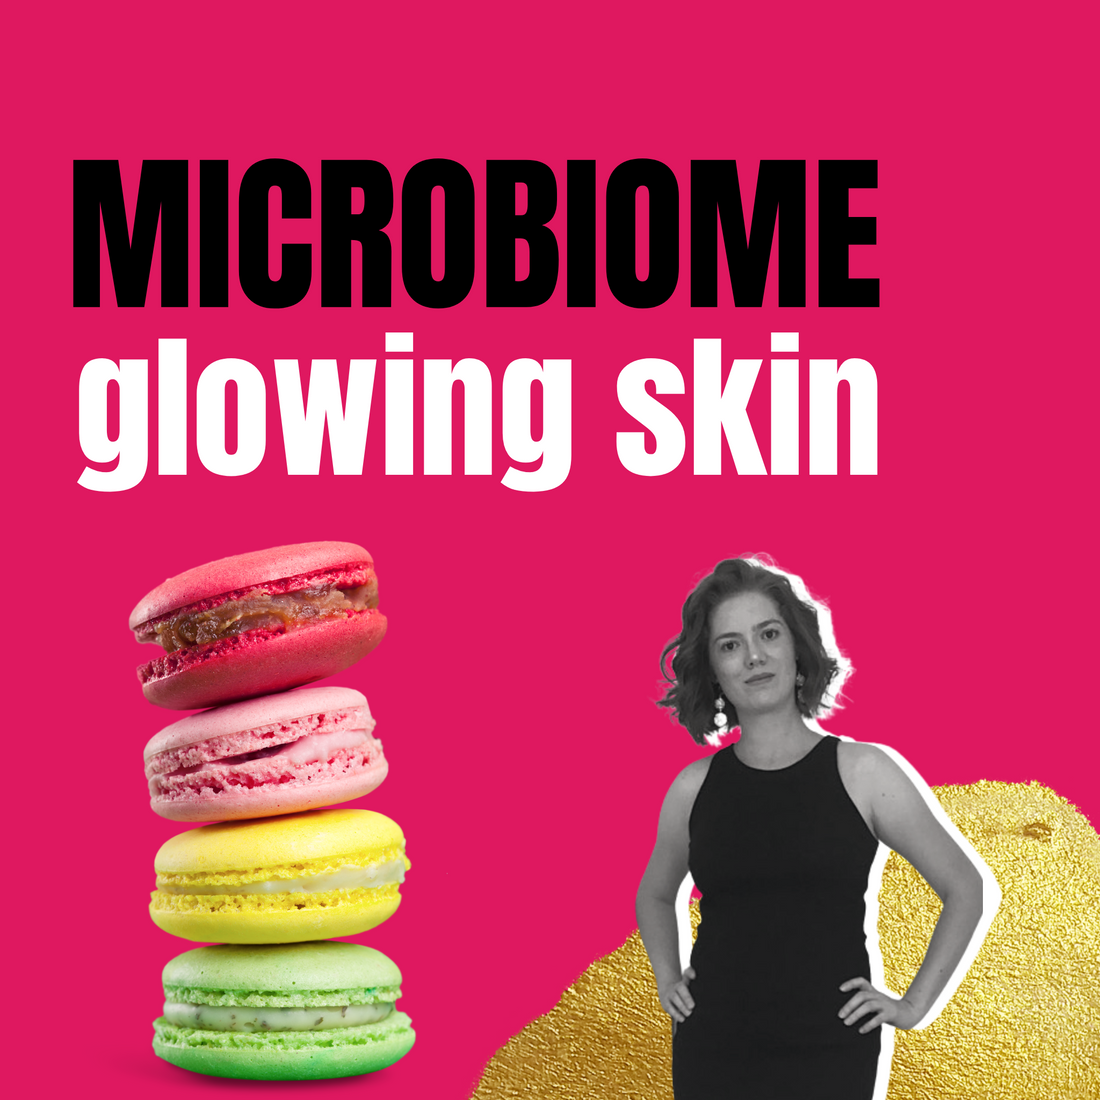 Microbiome gut health secrets for glowing skin